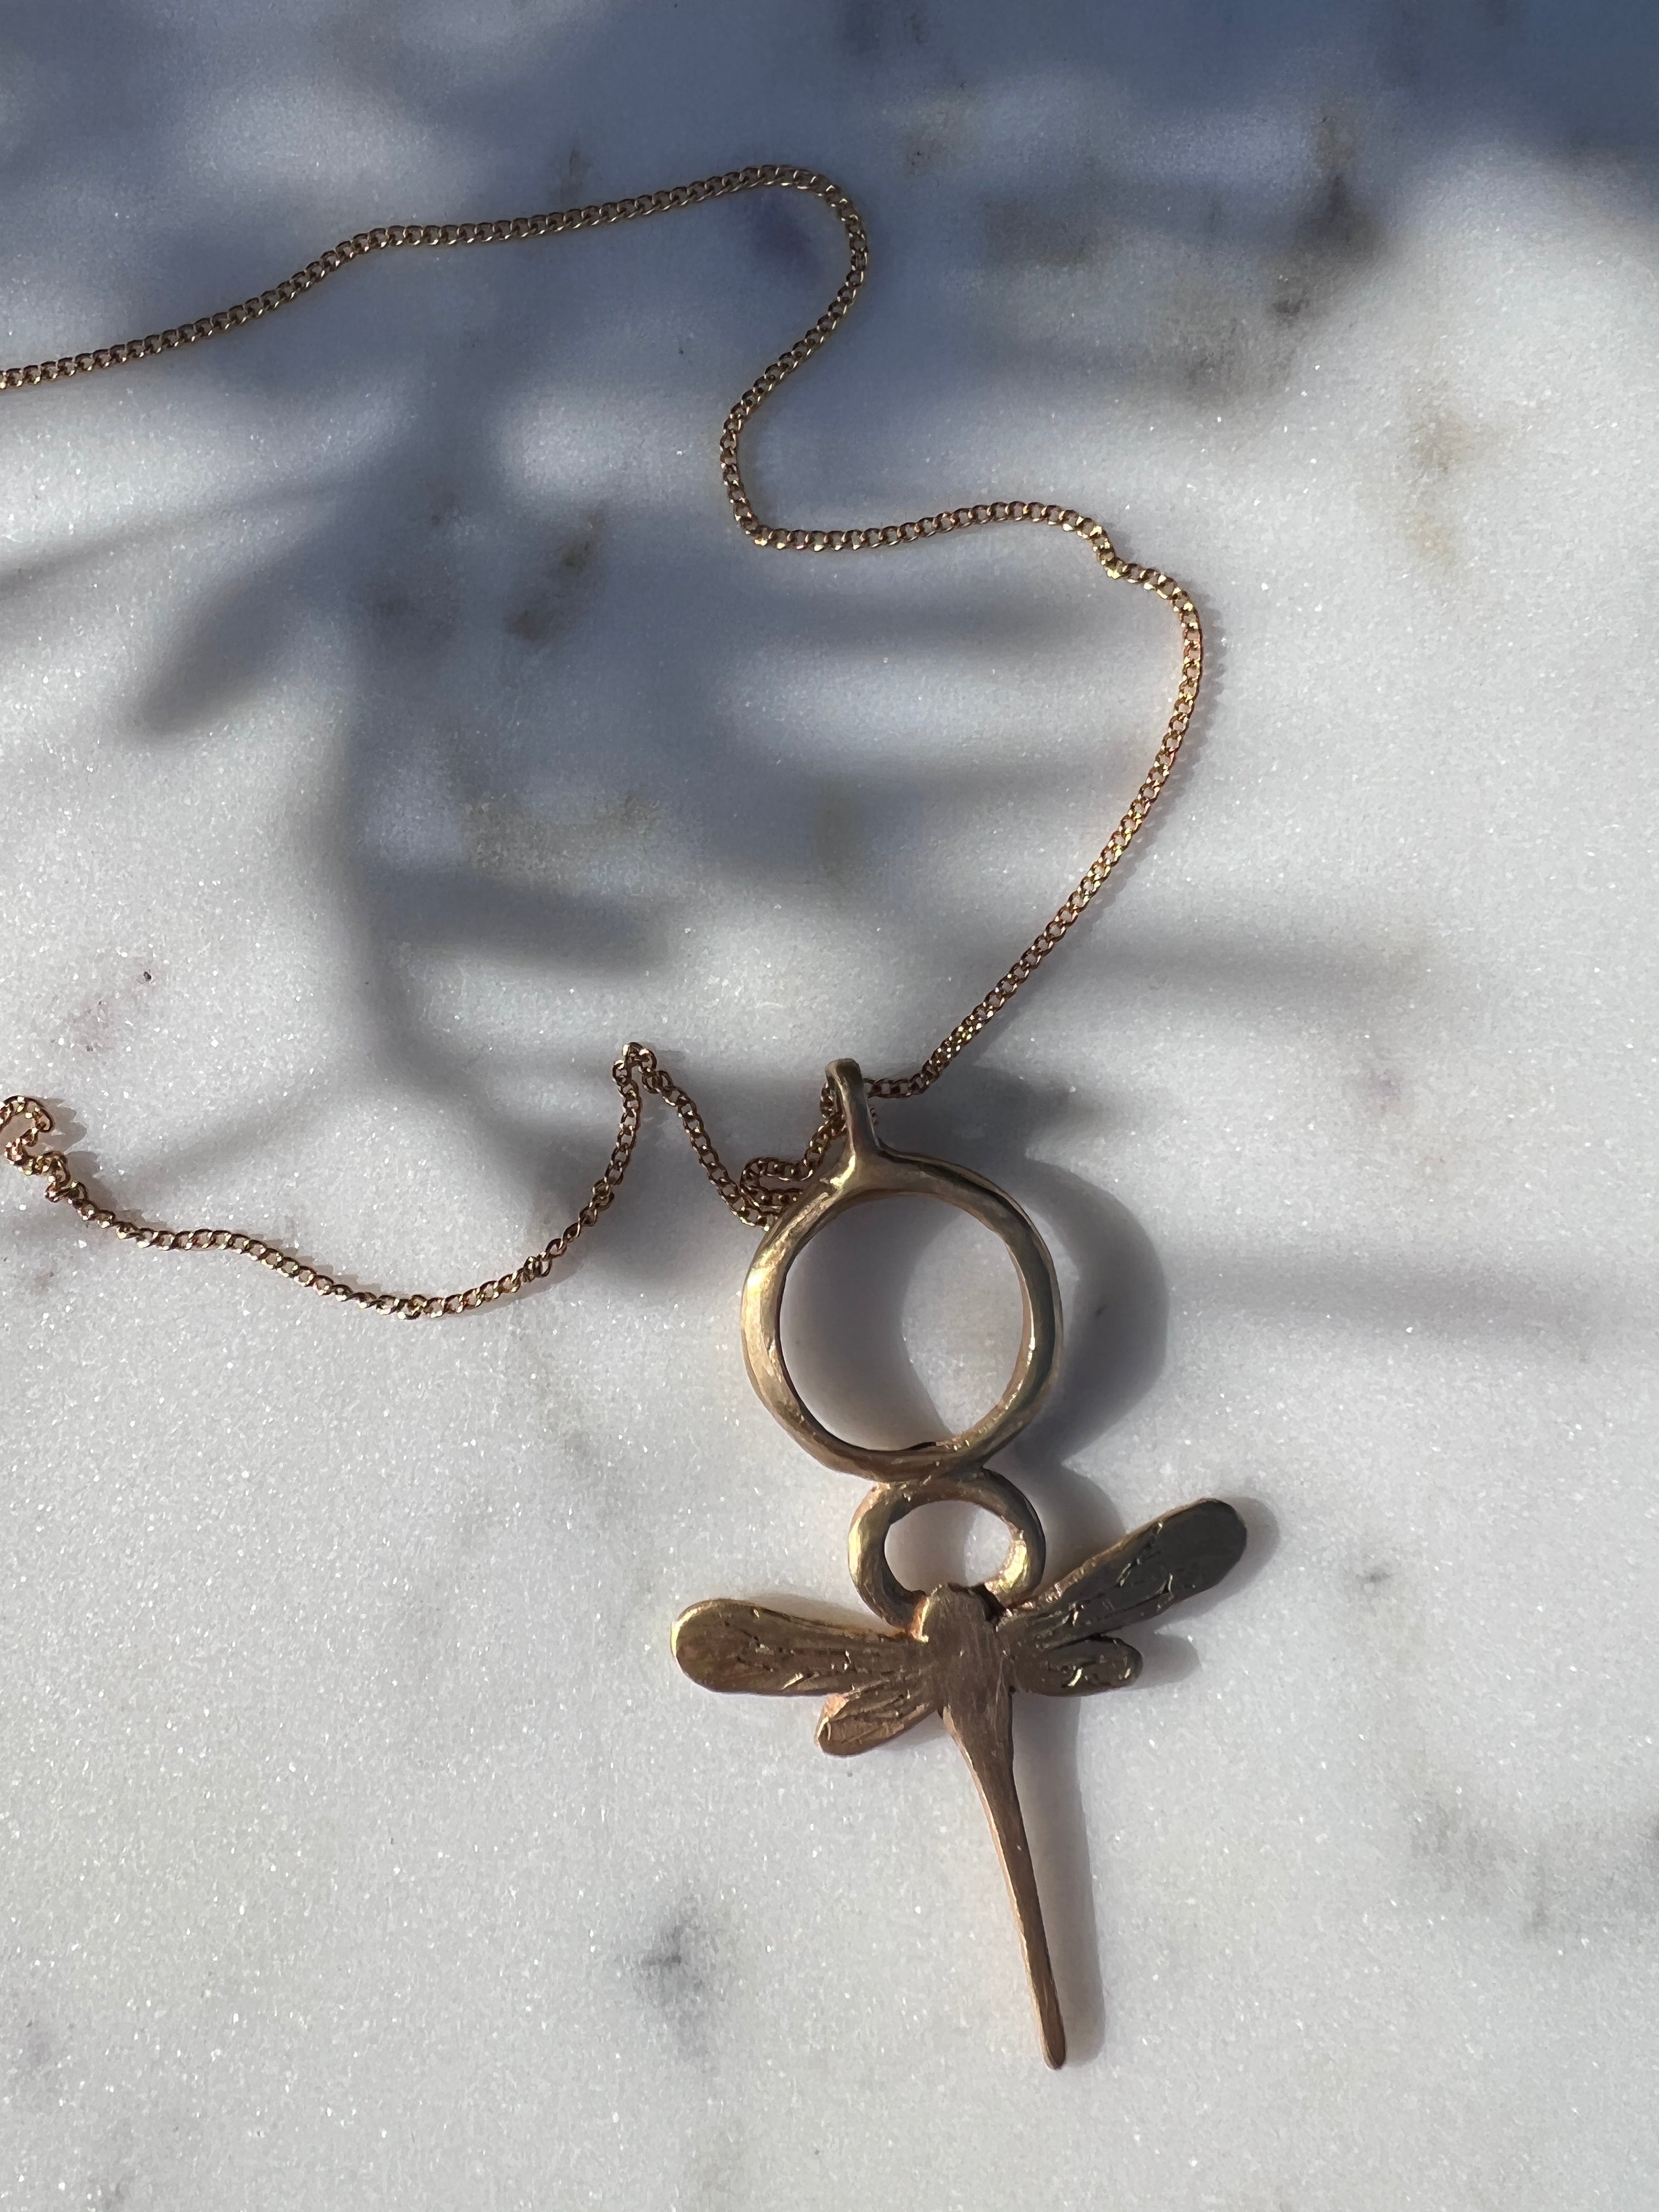 They"re From Venus Necklaces 40cm Dragonfly Necklace